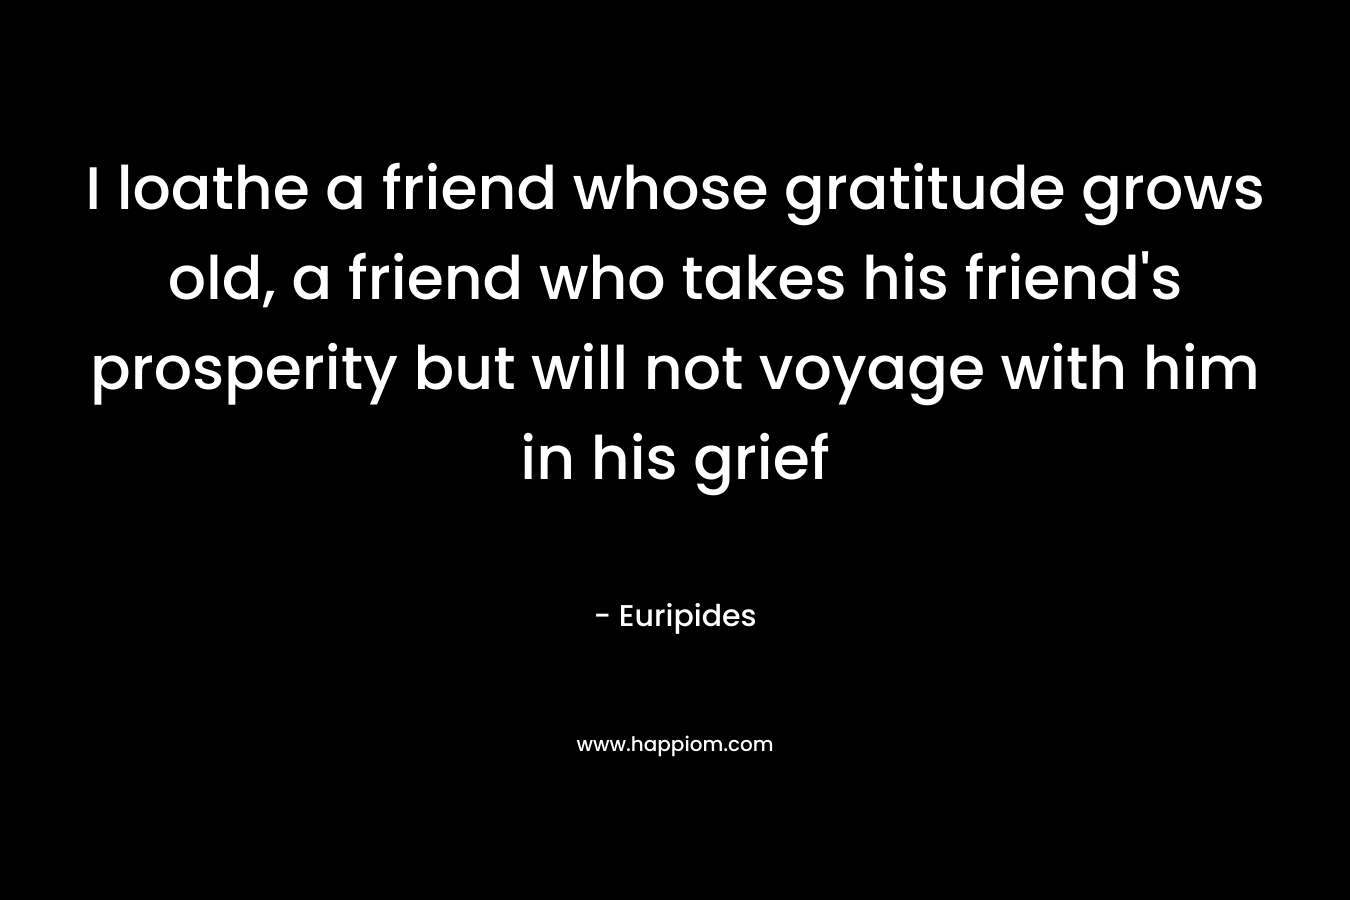 I loathe a friend whose gratitude grows old, a friend who takes his friend's prosperity but will not voyage with him in his grief